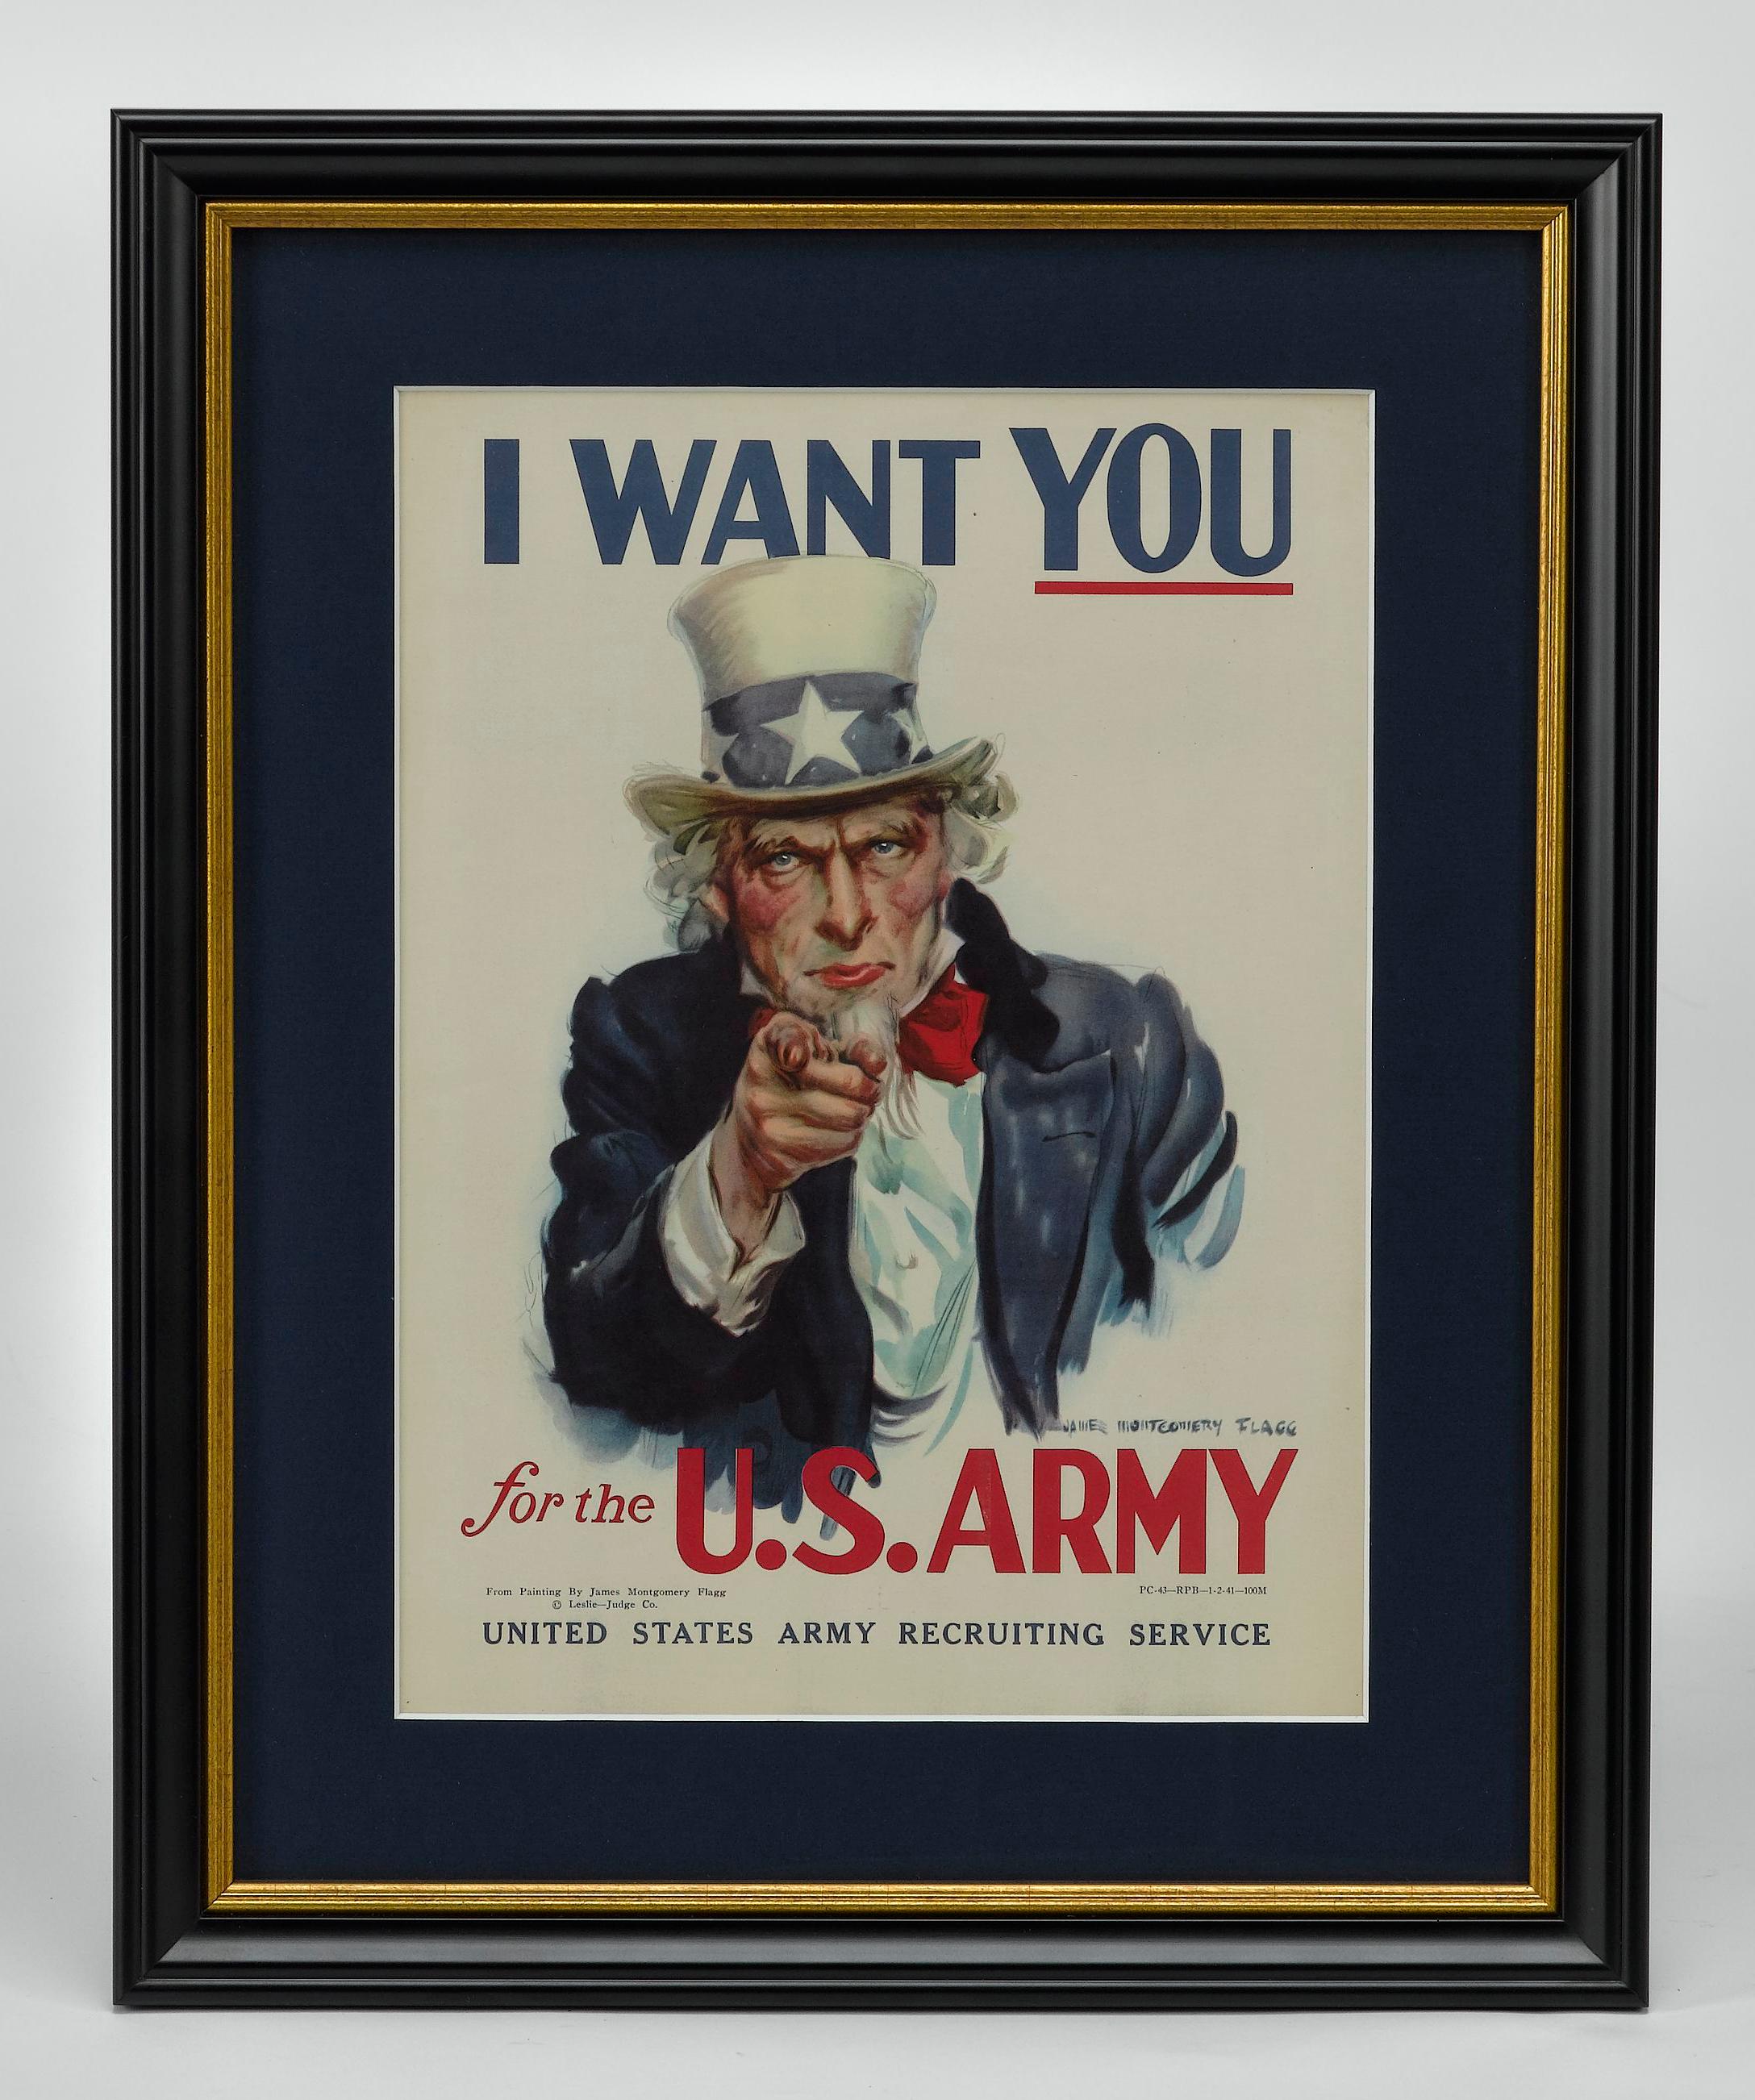 Presented is a vintage U.S. Army WWII recruitment poster by the famous artist James Montgomery Flagg. Published on January 2, 1941 by Leslie-Judge Co., this poster is the World War II adaptation of Flagg's memorable 1917 “I Want You” Uncle Sam